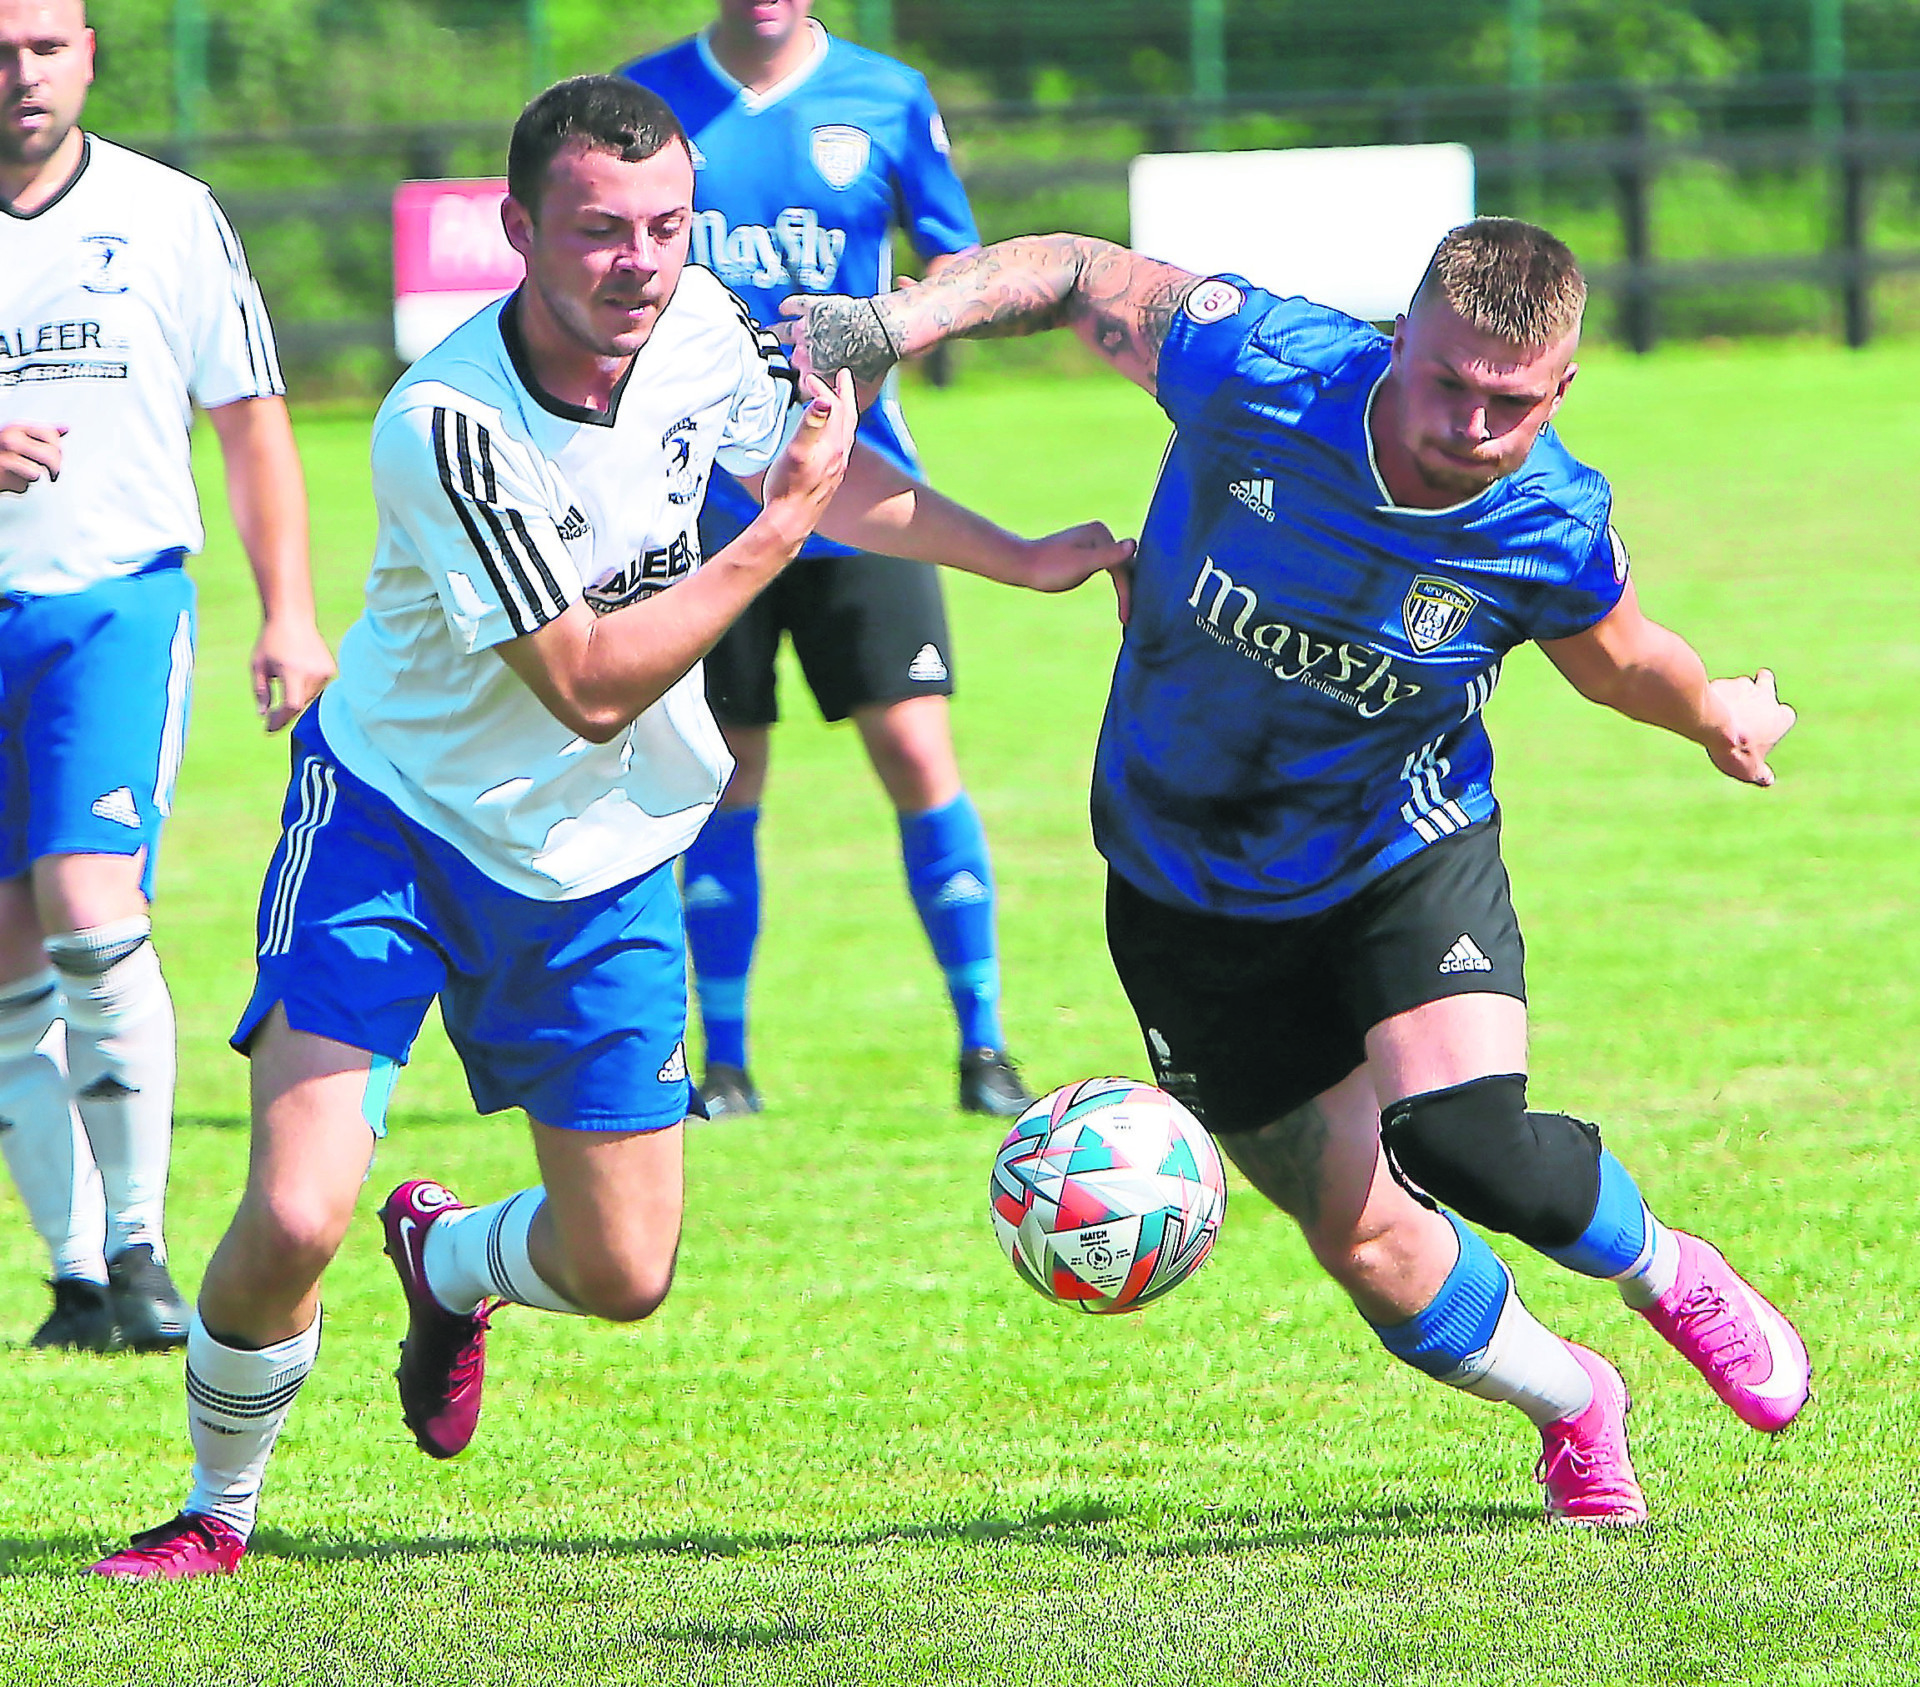 Derby delight for Beragh and Derg Res as Harps salvage point